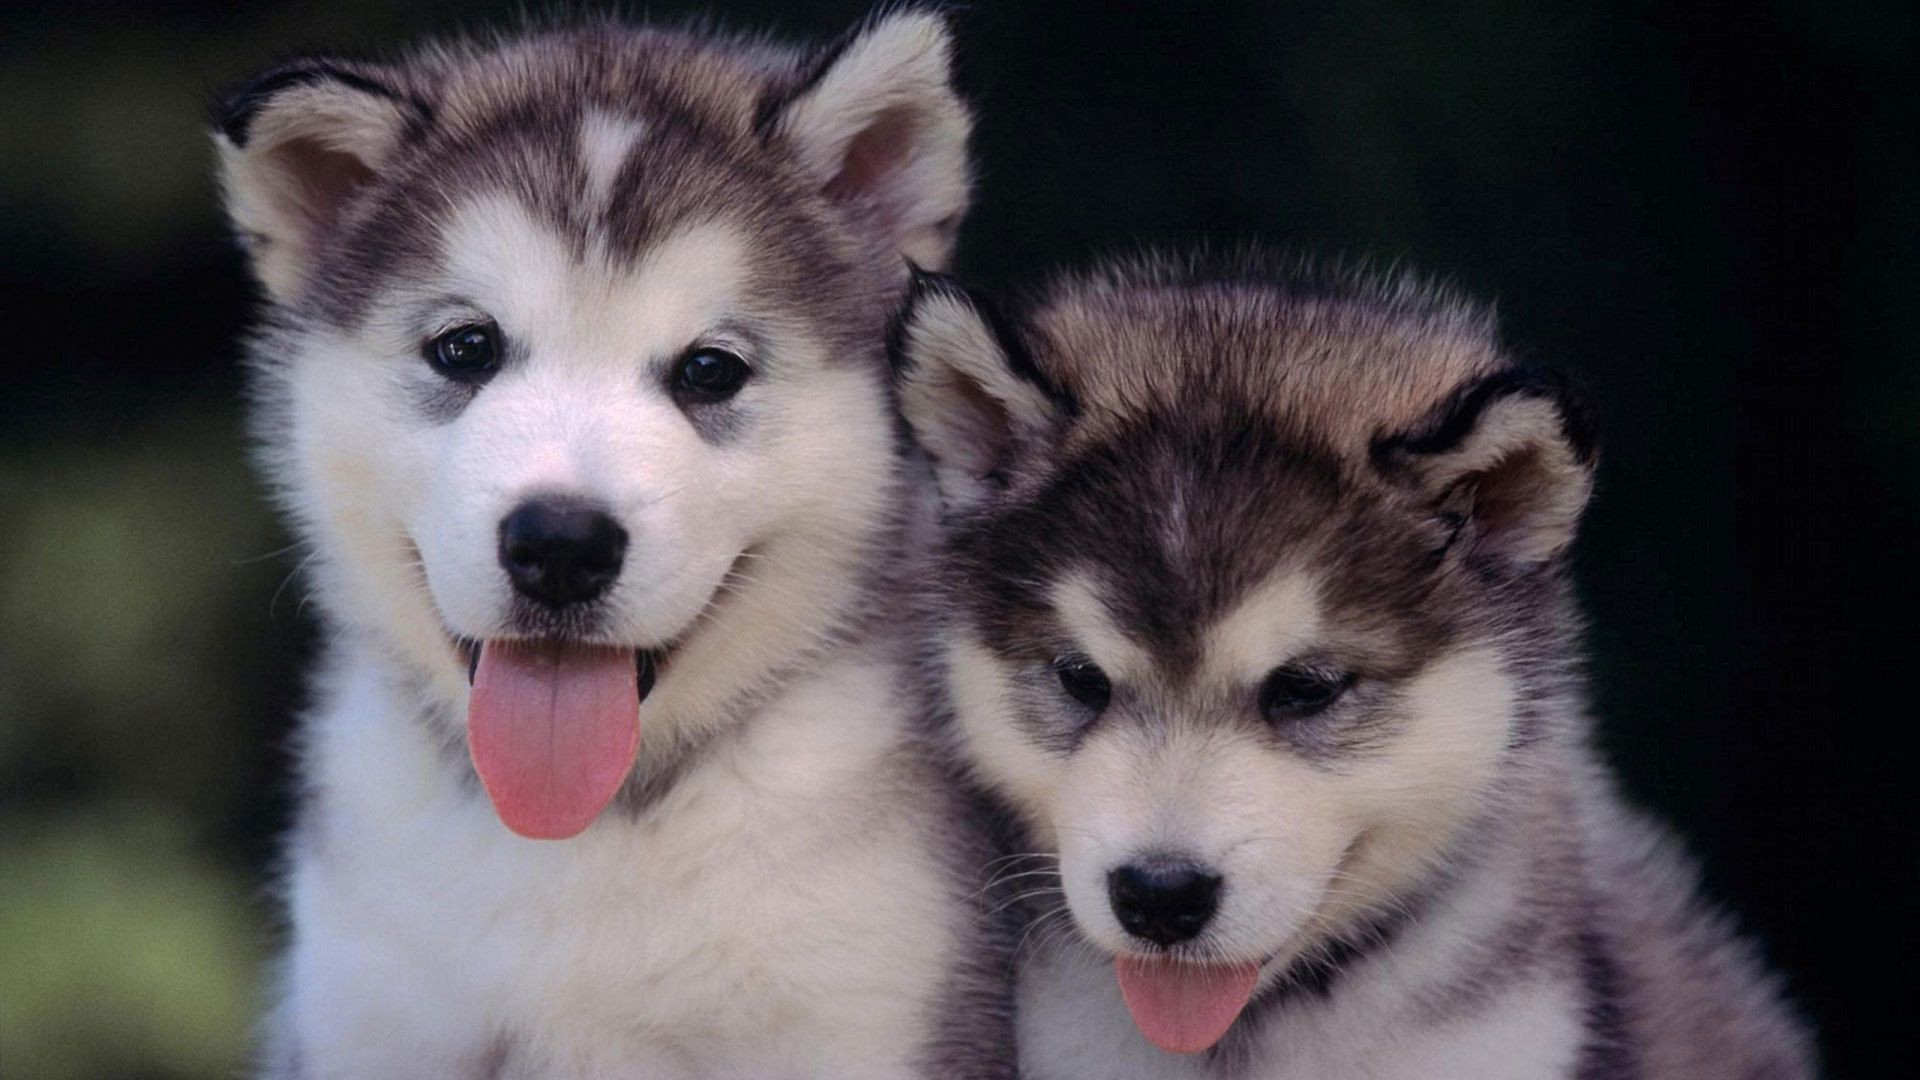 1920x1080 Cute Dogs And Puppies Husky - wallpaper.